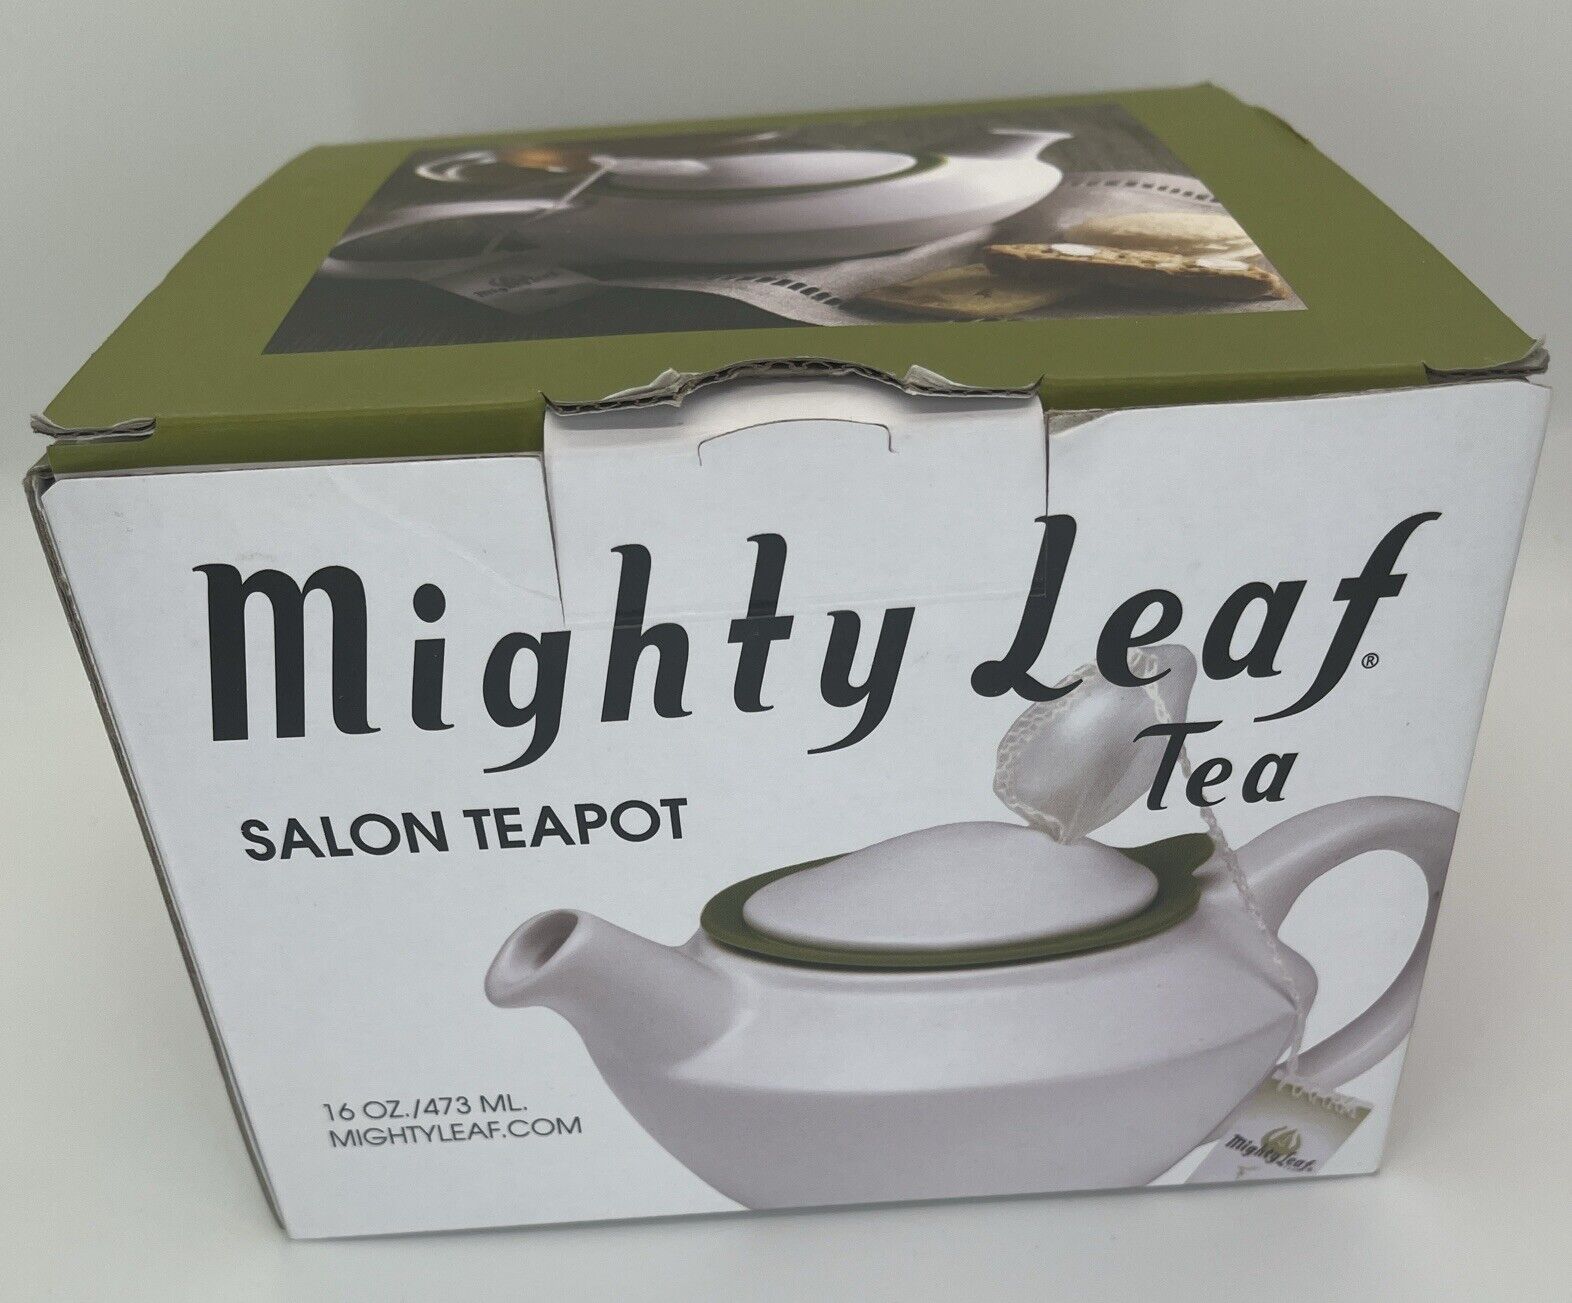 Mighty Leaf Salon Teapot - White & Green - Brand New in box